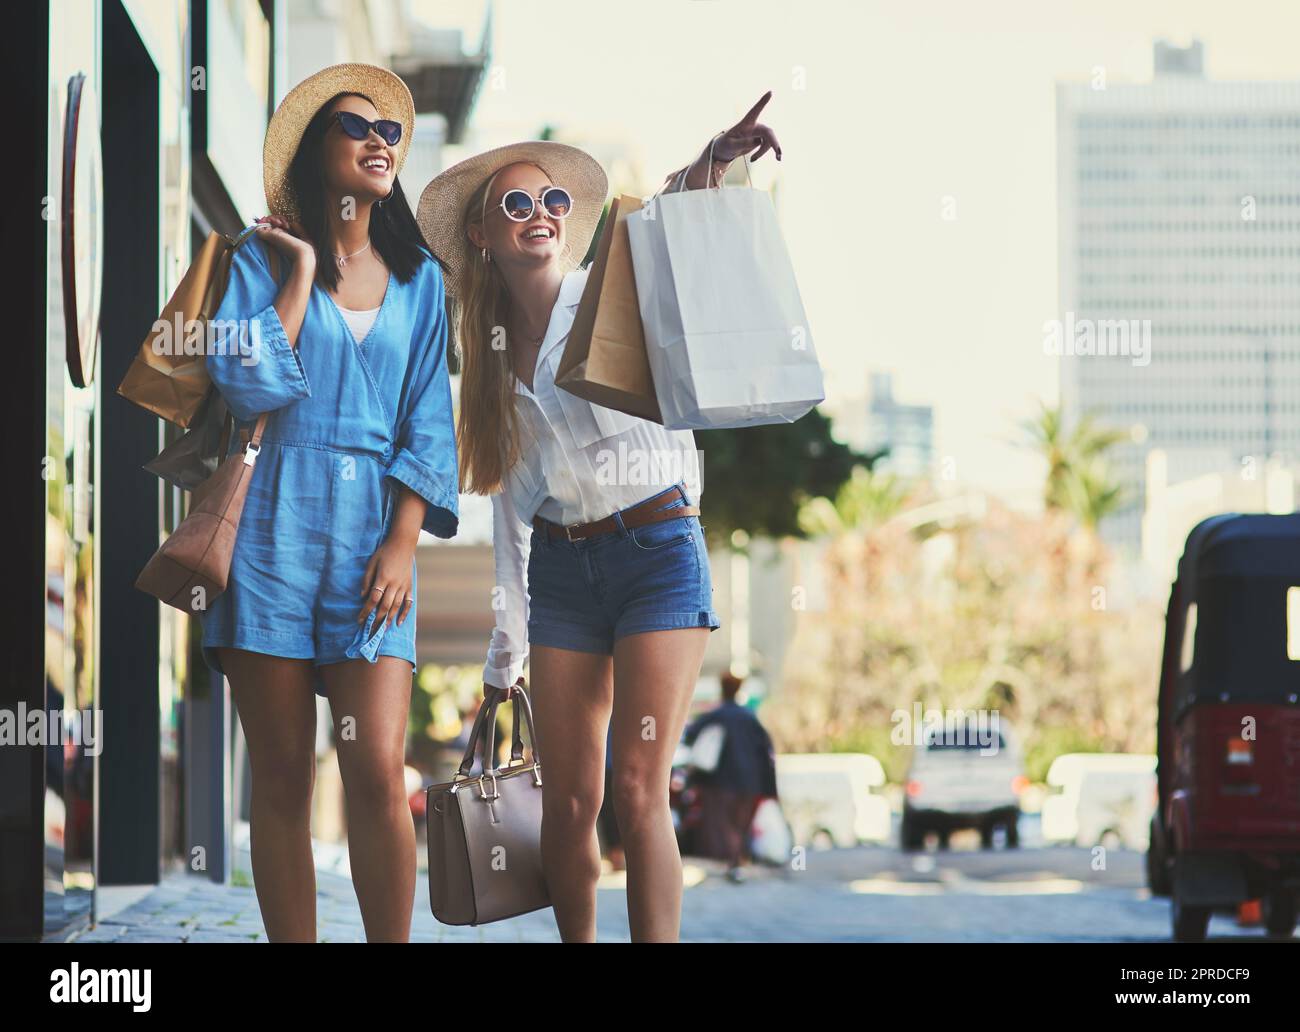 Thats where the sale is. an attractive young woman pointing towards something while walking with her best friend during a shopping spree in the city. Stock Photo